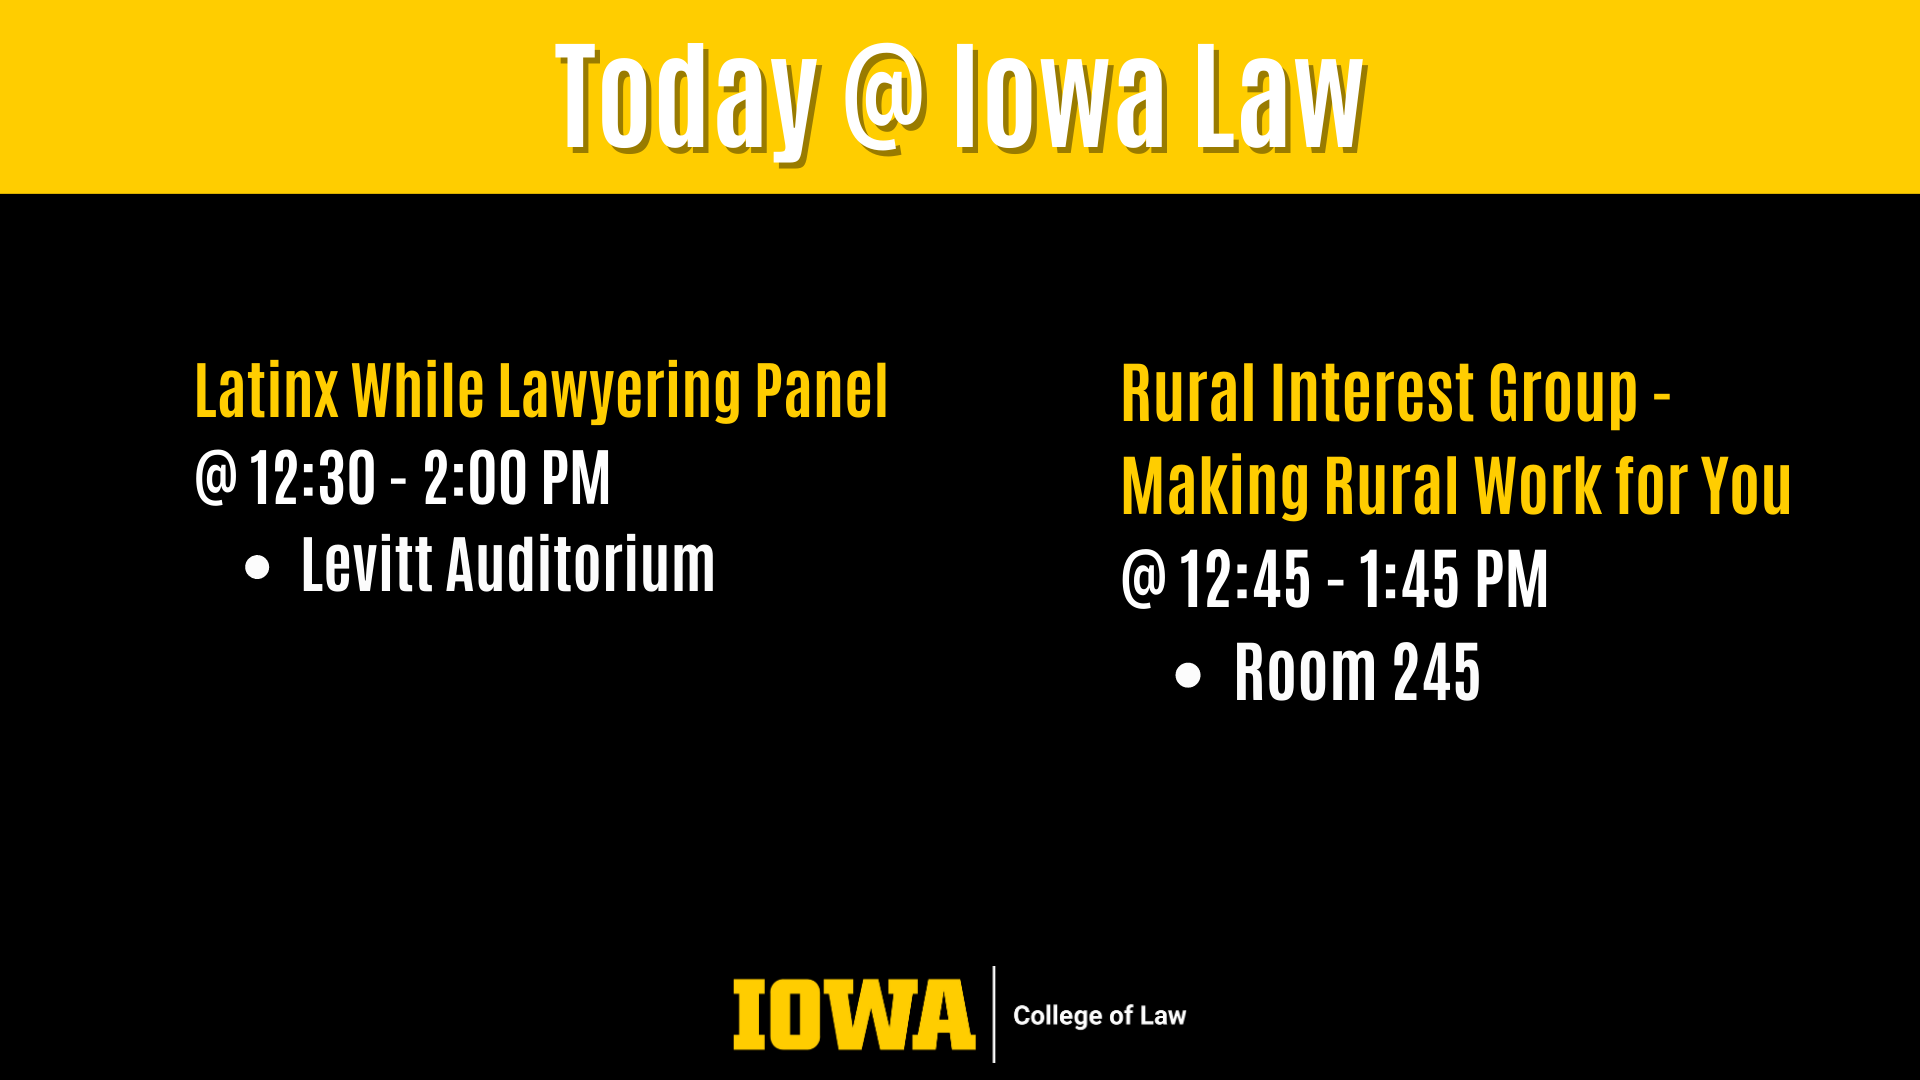 Latinx While Lawyering Panel @ 12:30 - 2:00 PM Levitt Auditorium Rural Interest Group - Making Rural Work for You  @ 12:45 - 1:45 PM Room 245